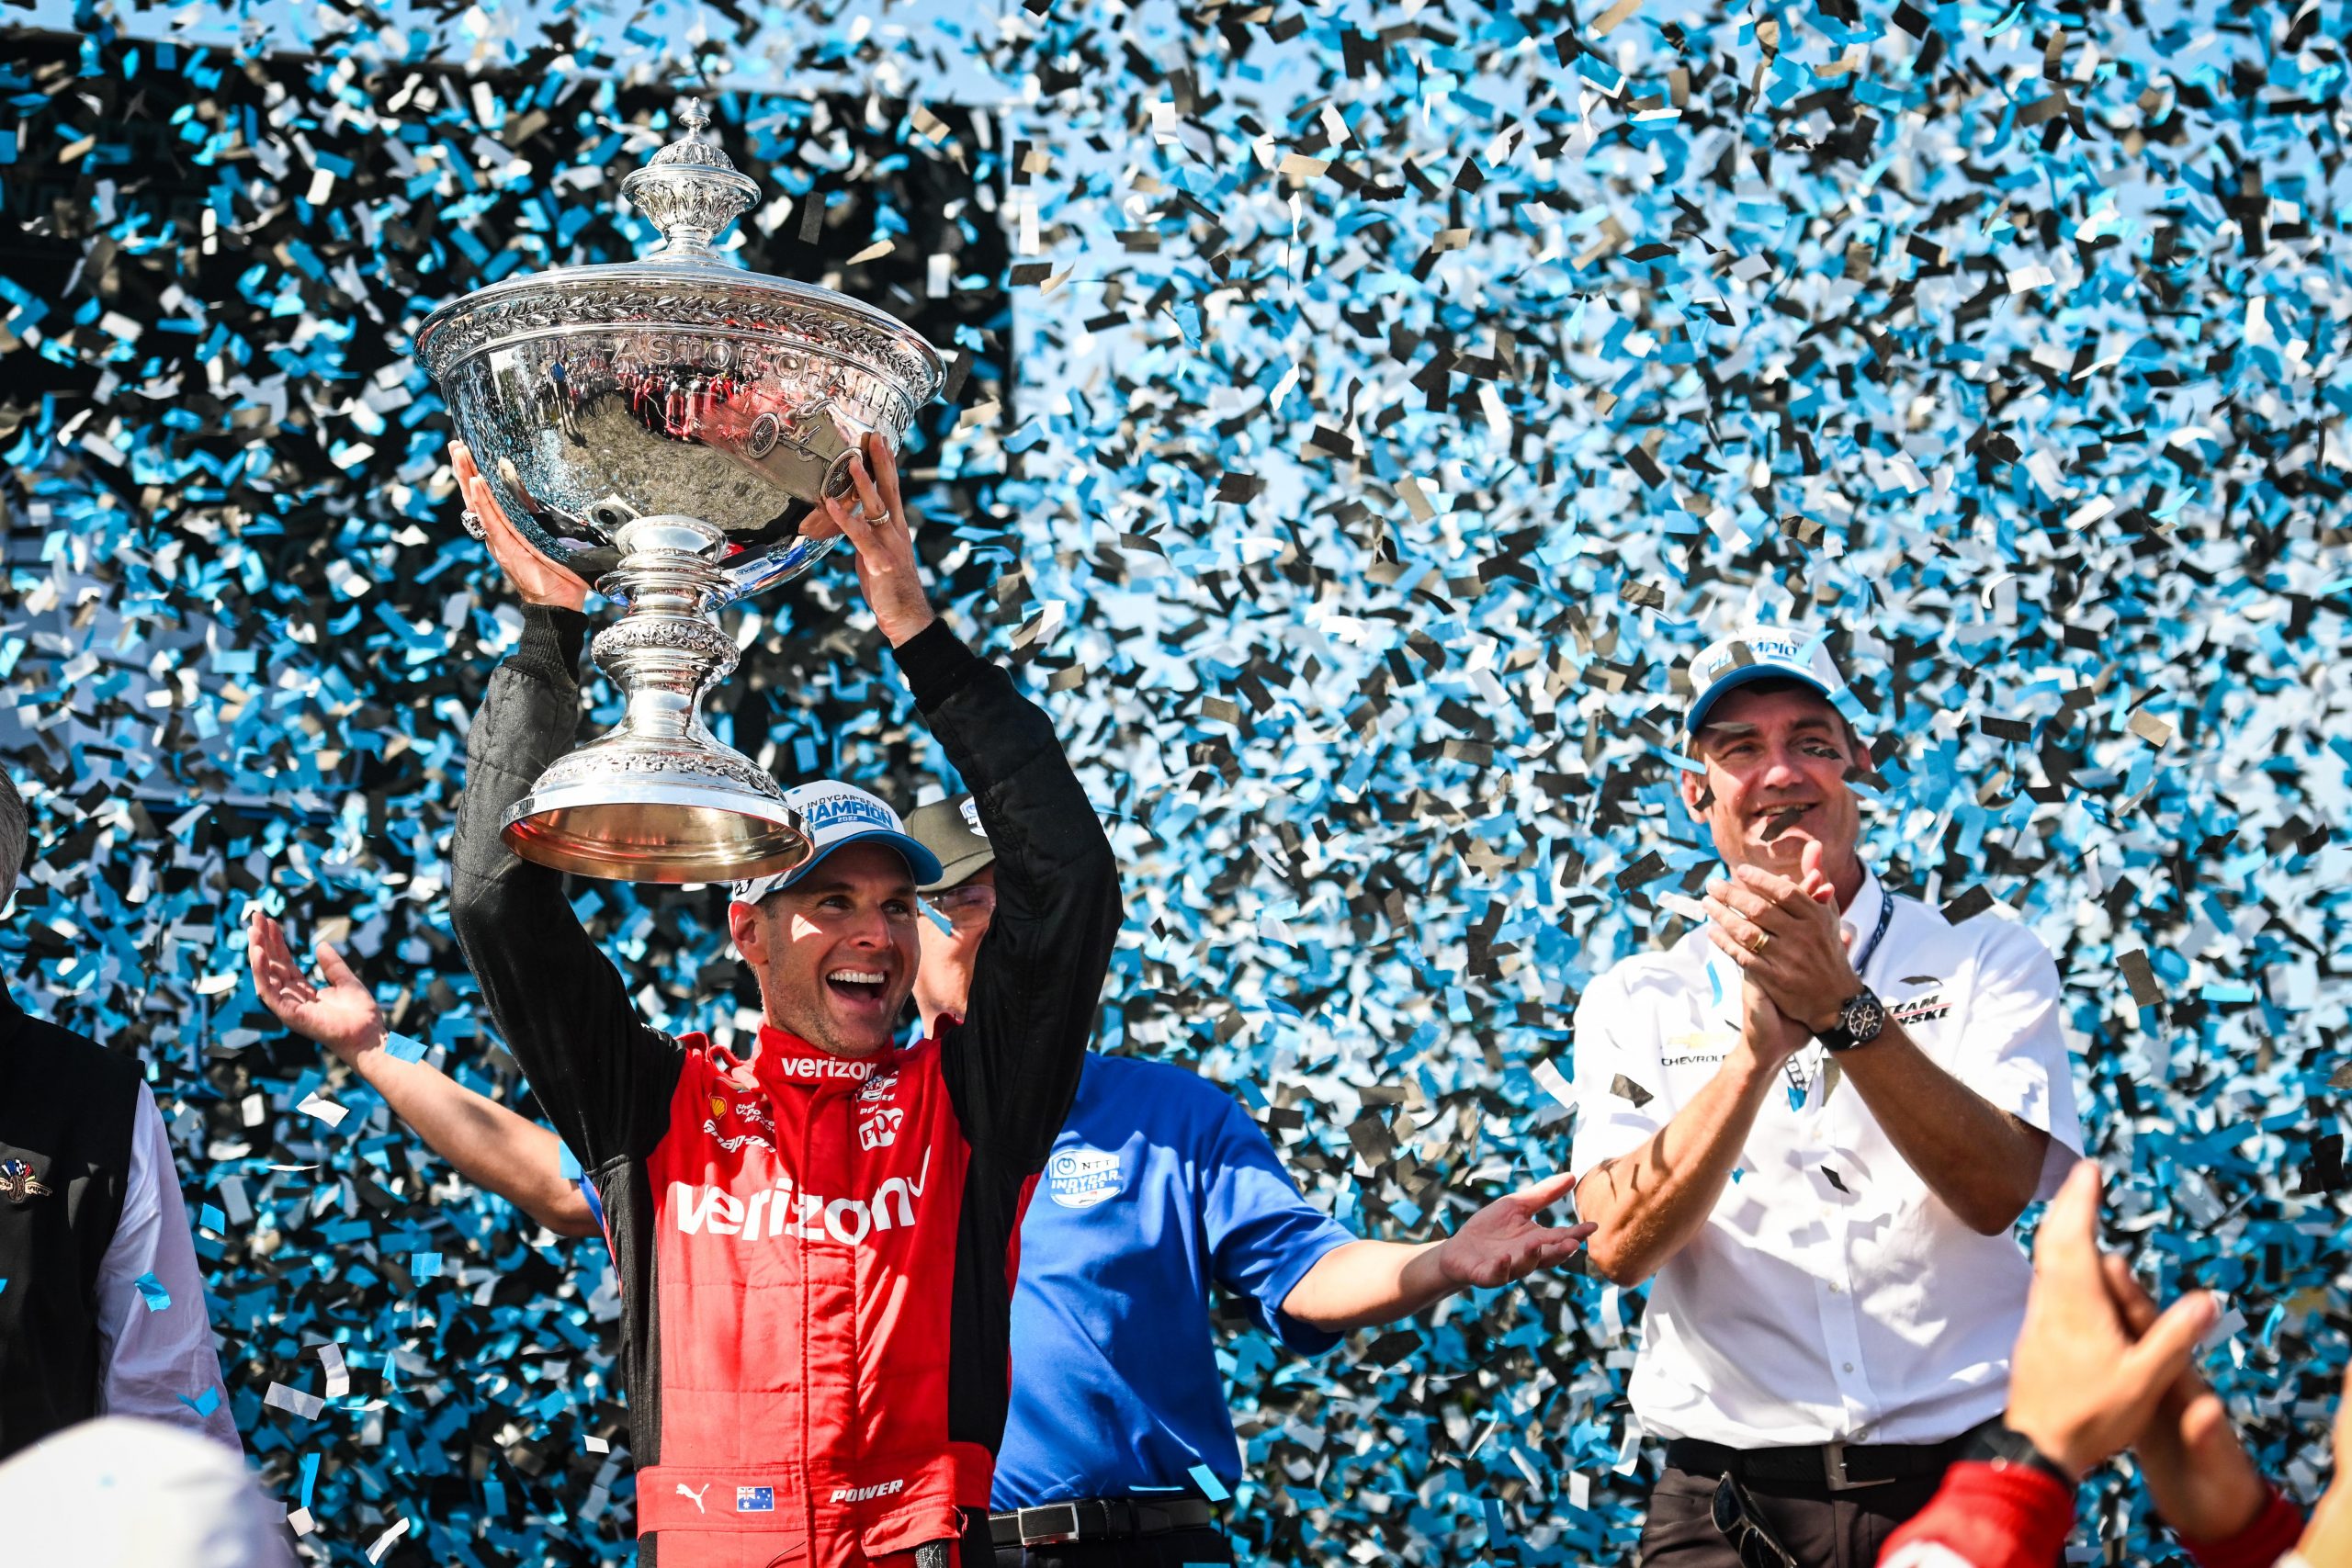 Team Penske's Will Power lifts the Astor Challenge Cup after clinching the IndyCar Series championship at Laguna Seca